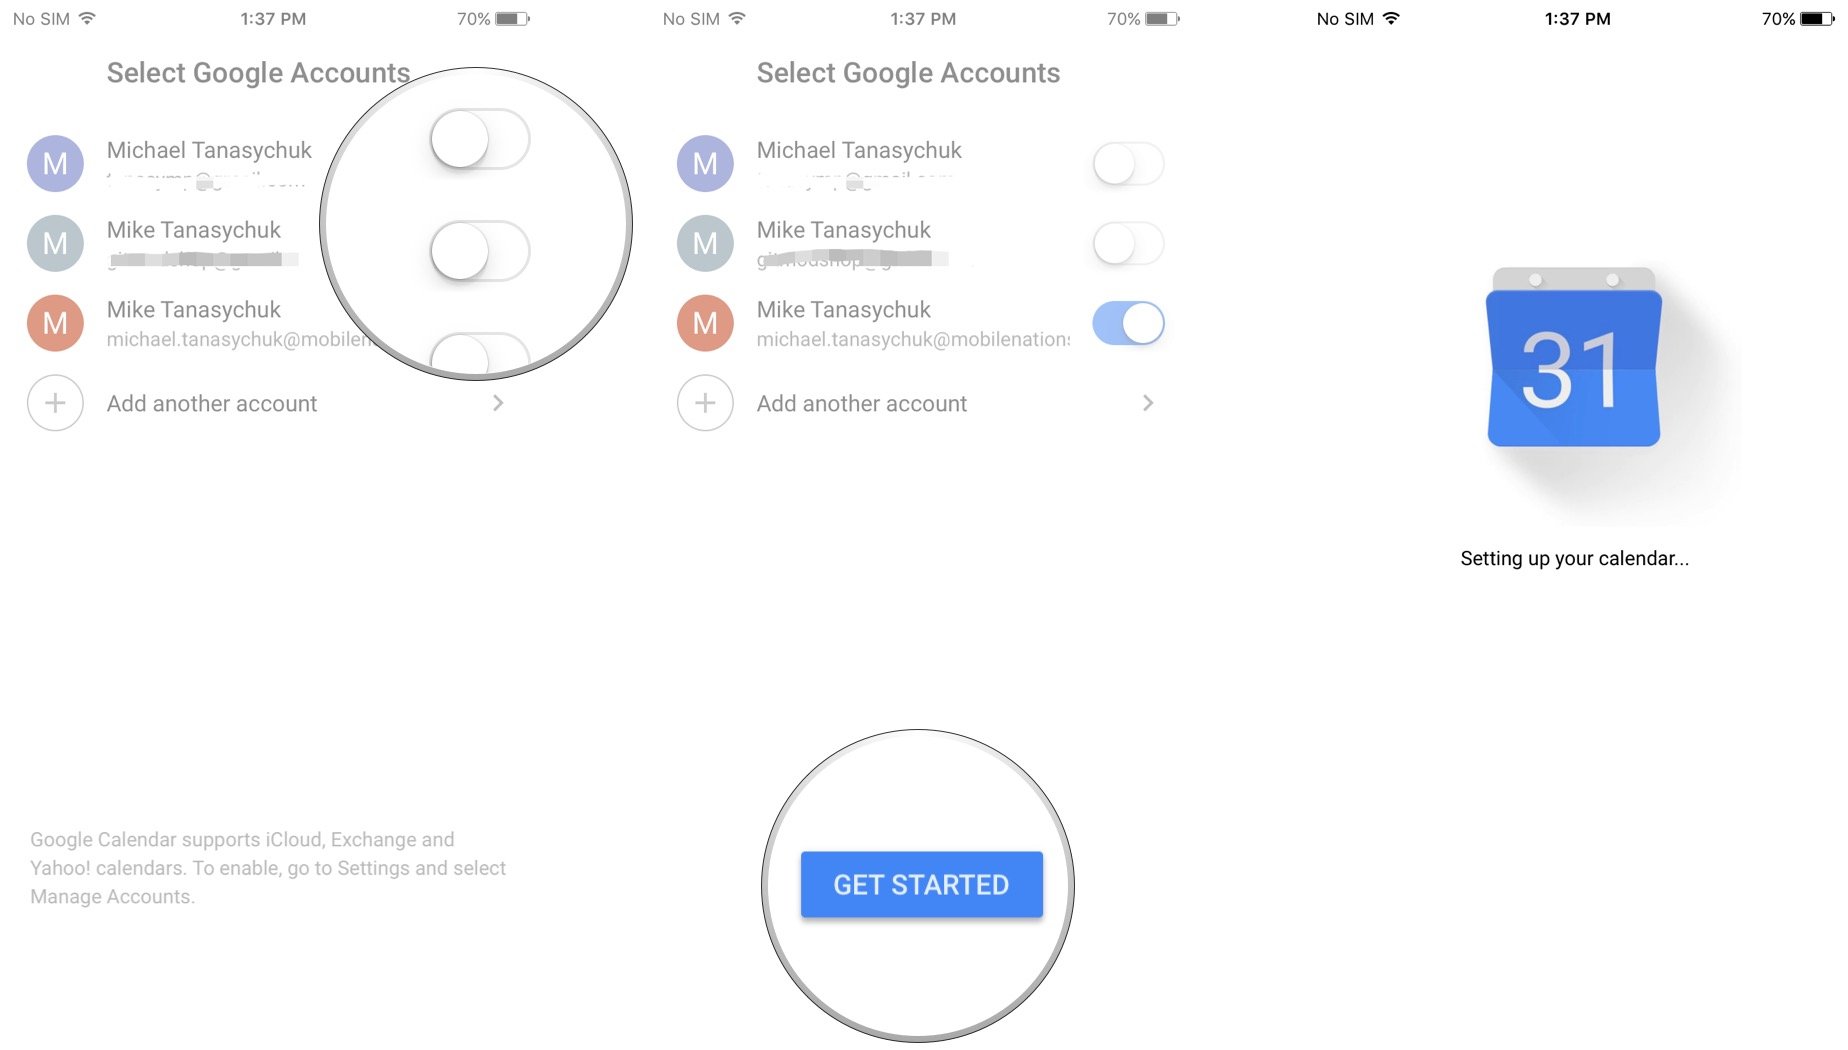 Launch Google Calendar, tap the switch next to an existing account or add a new account and sign in, tap Get Started